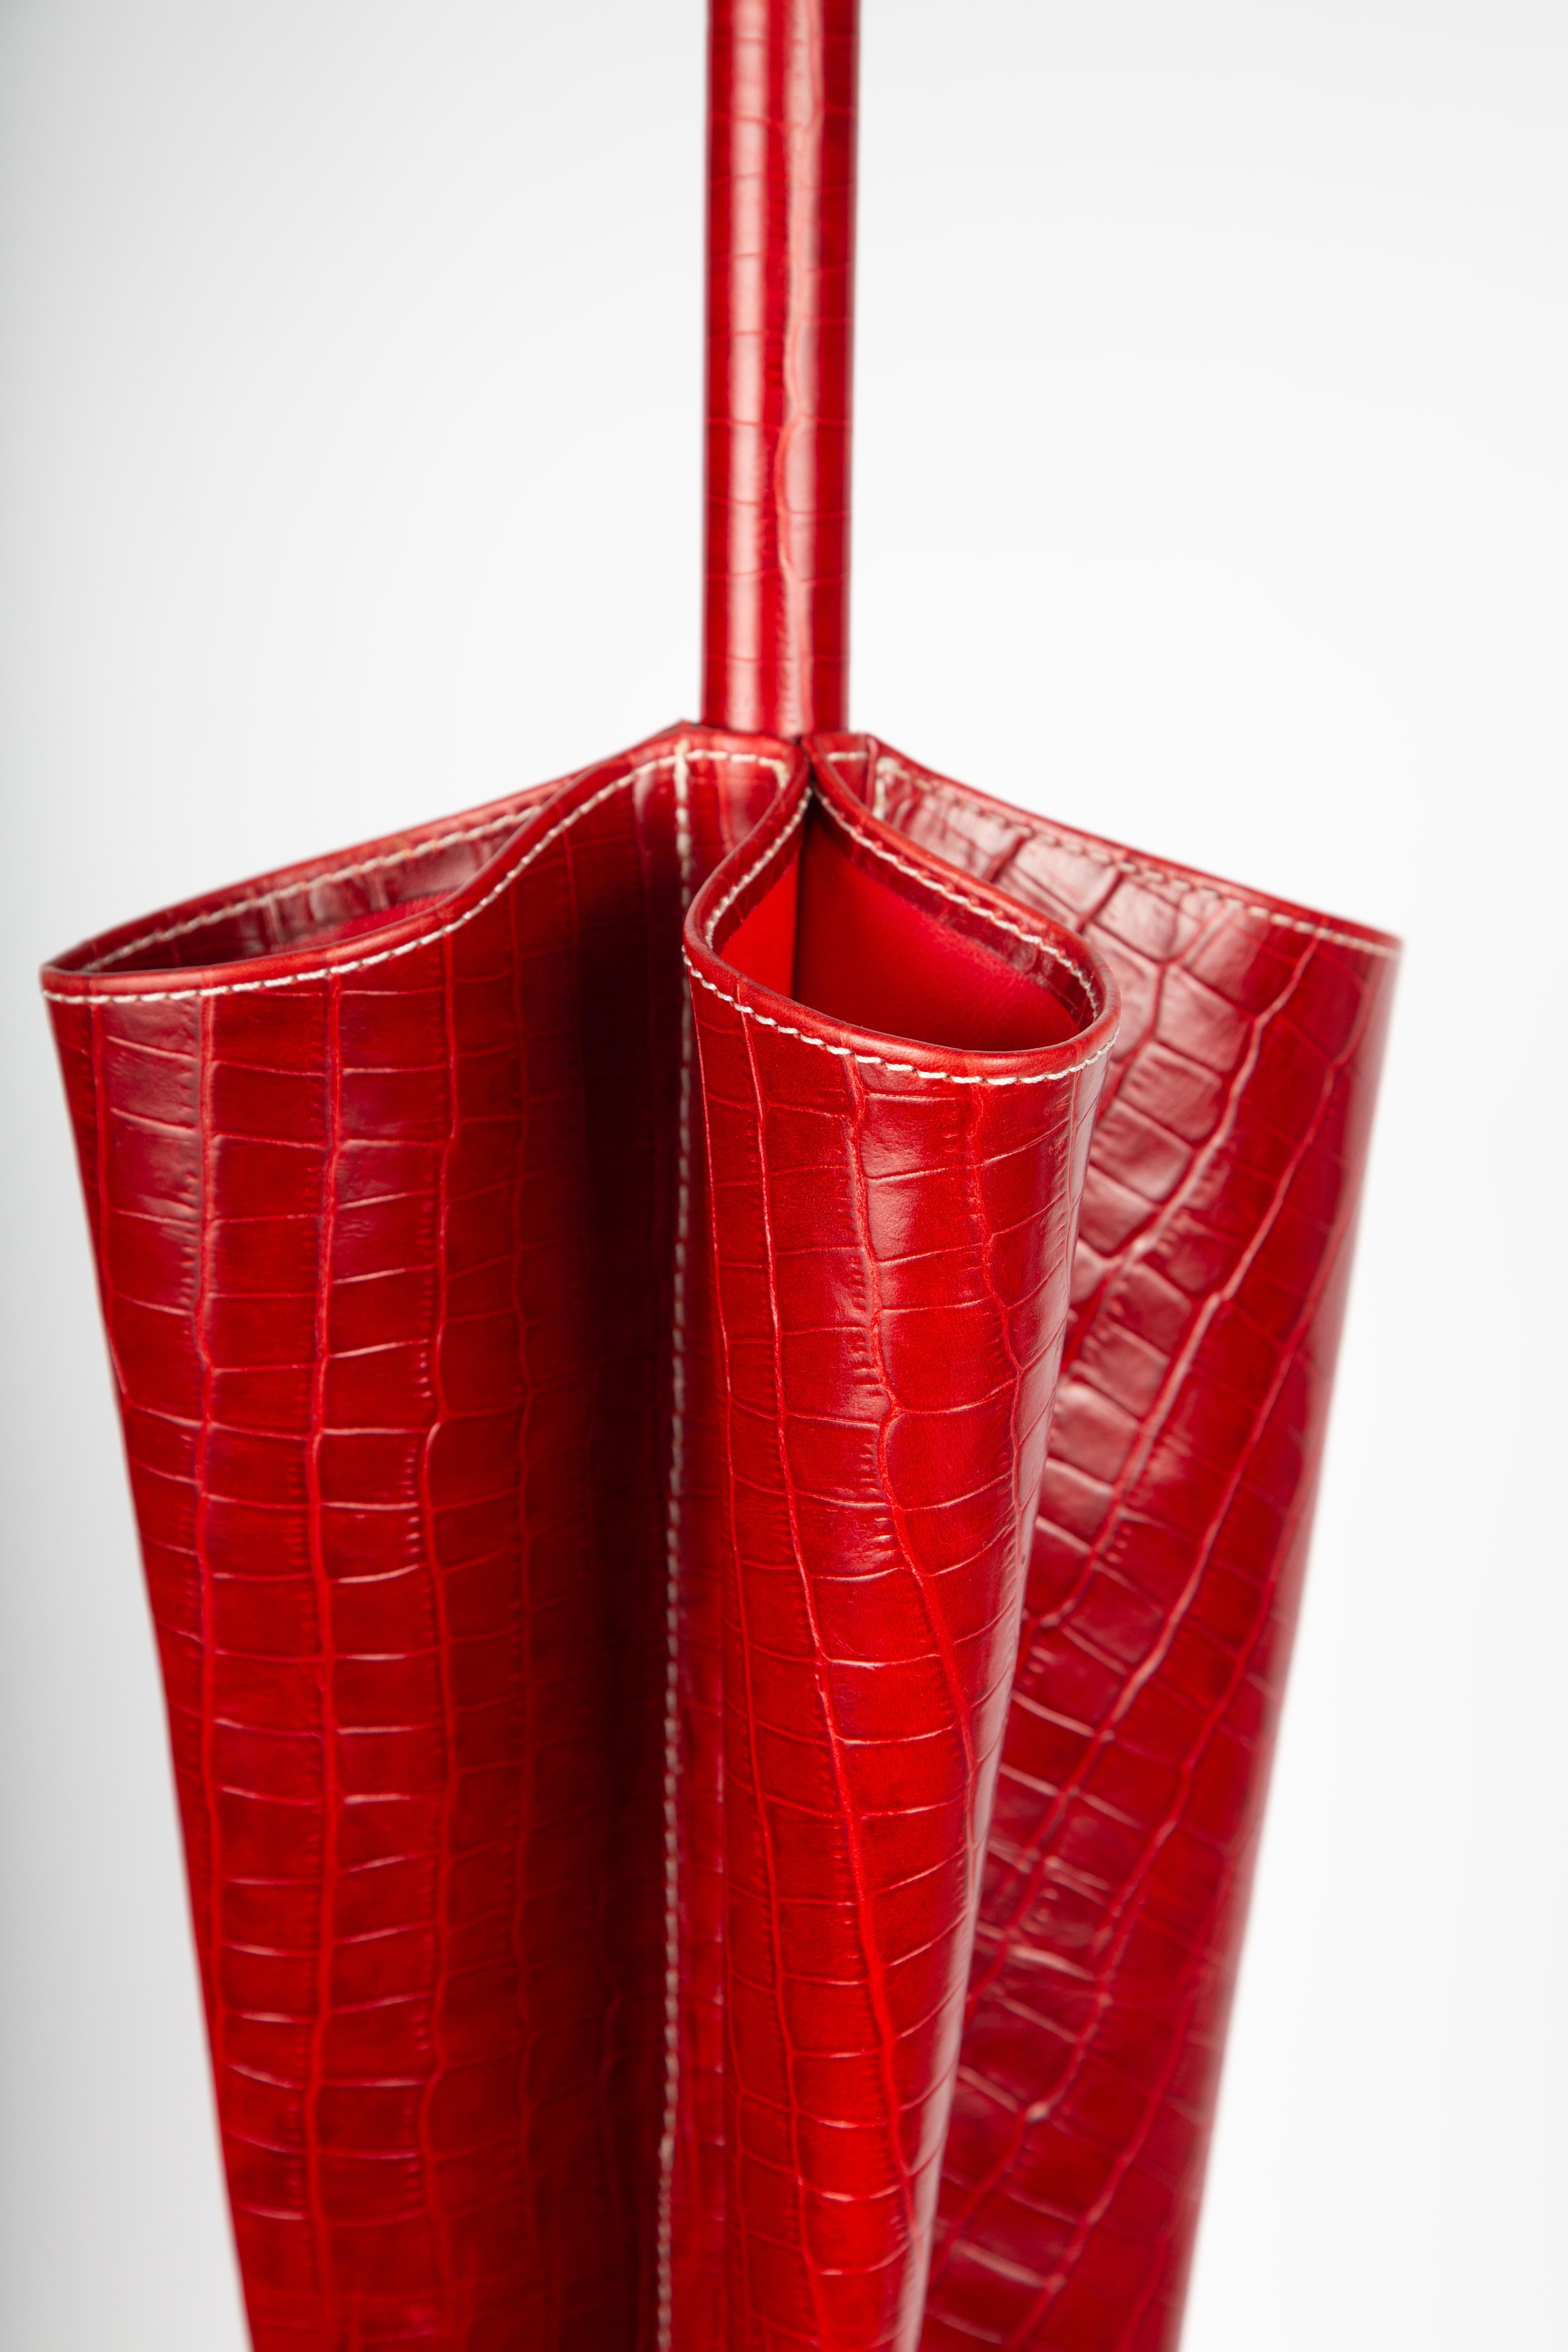 Vig Bergdorf Goodman Embossed Croc Leather Umbrella Stand In Good Condition For Sale In New York, NY